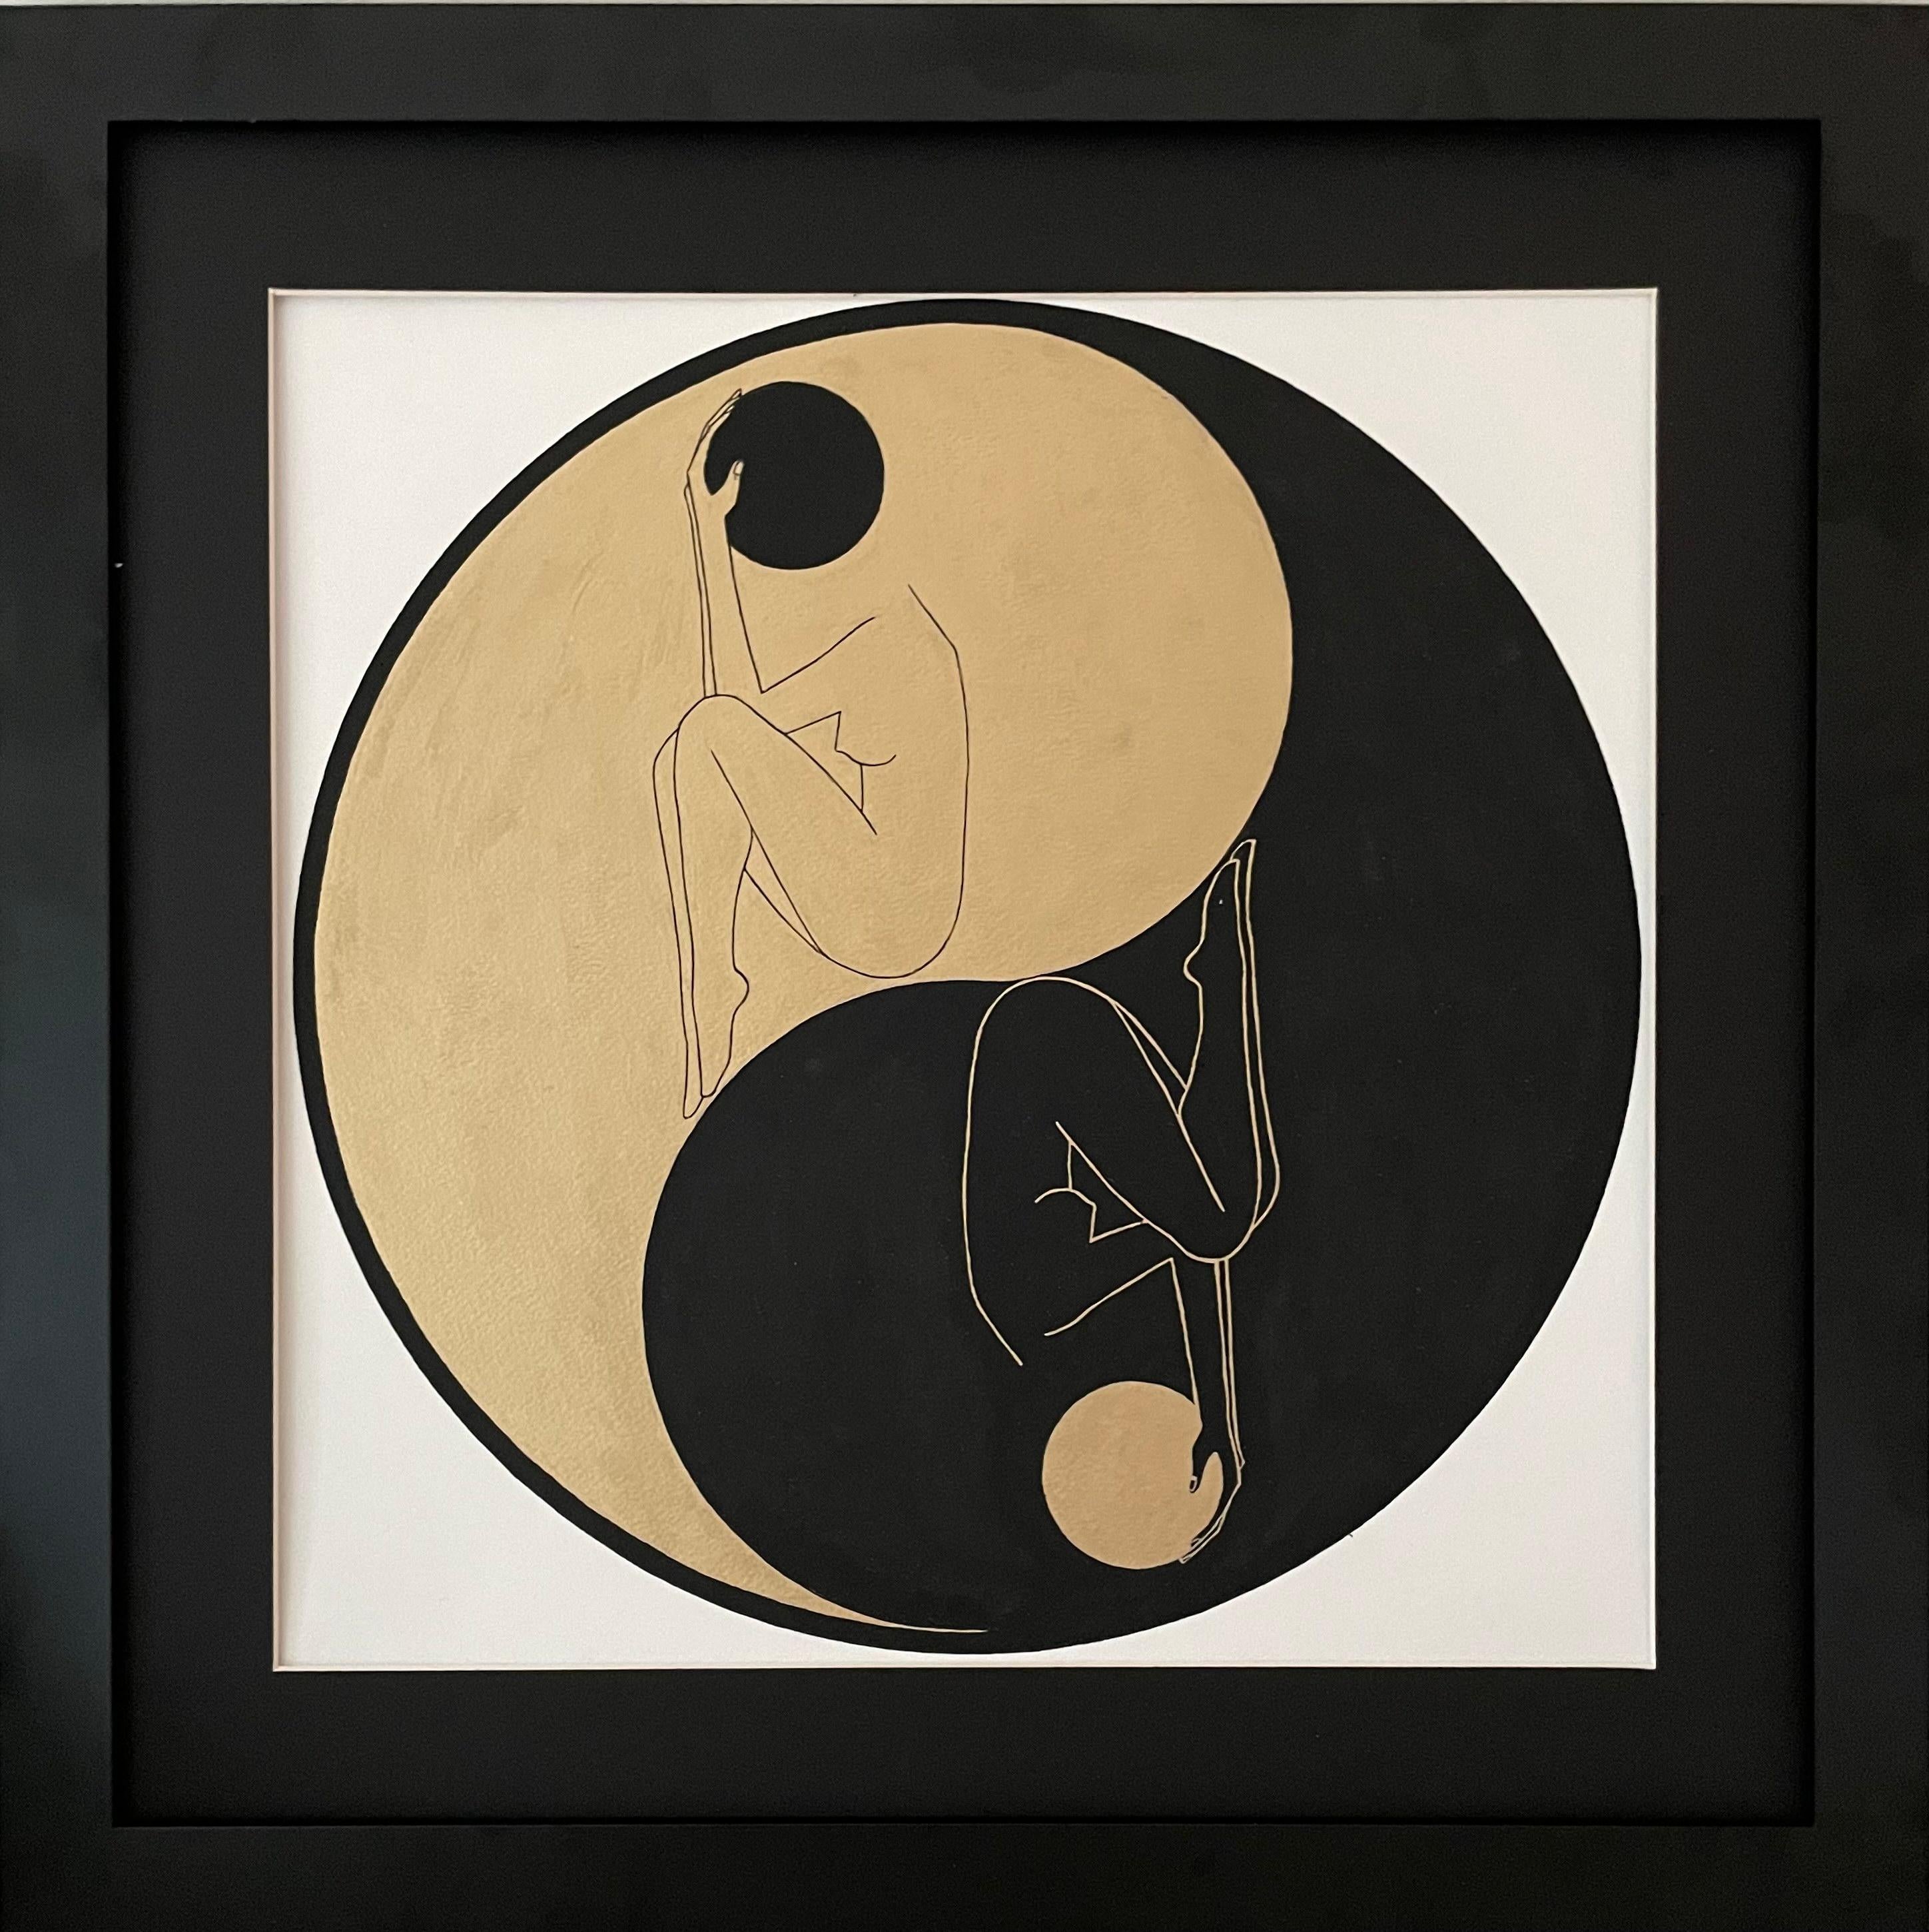 Yin and Yang - line drawing figure in a circle with gold and black disk